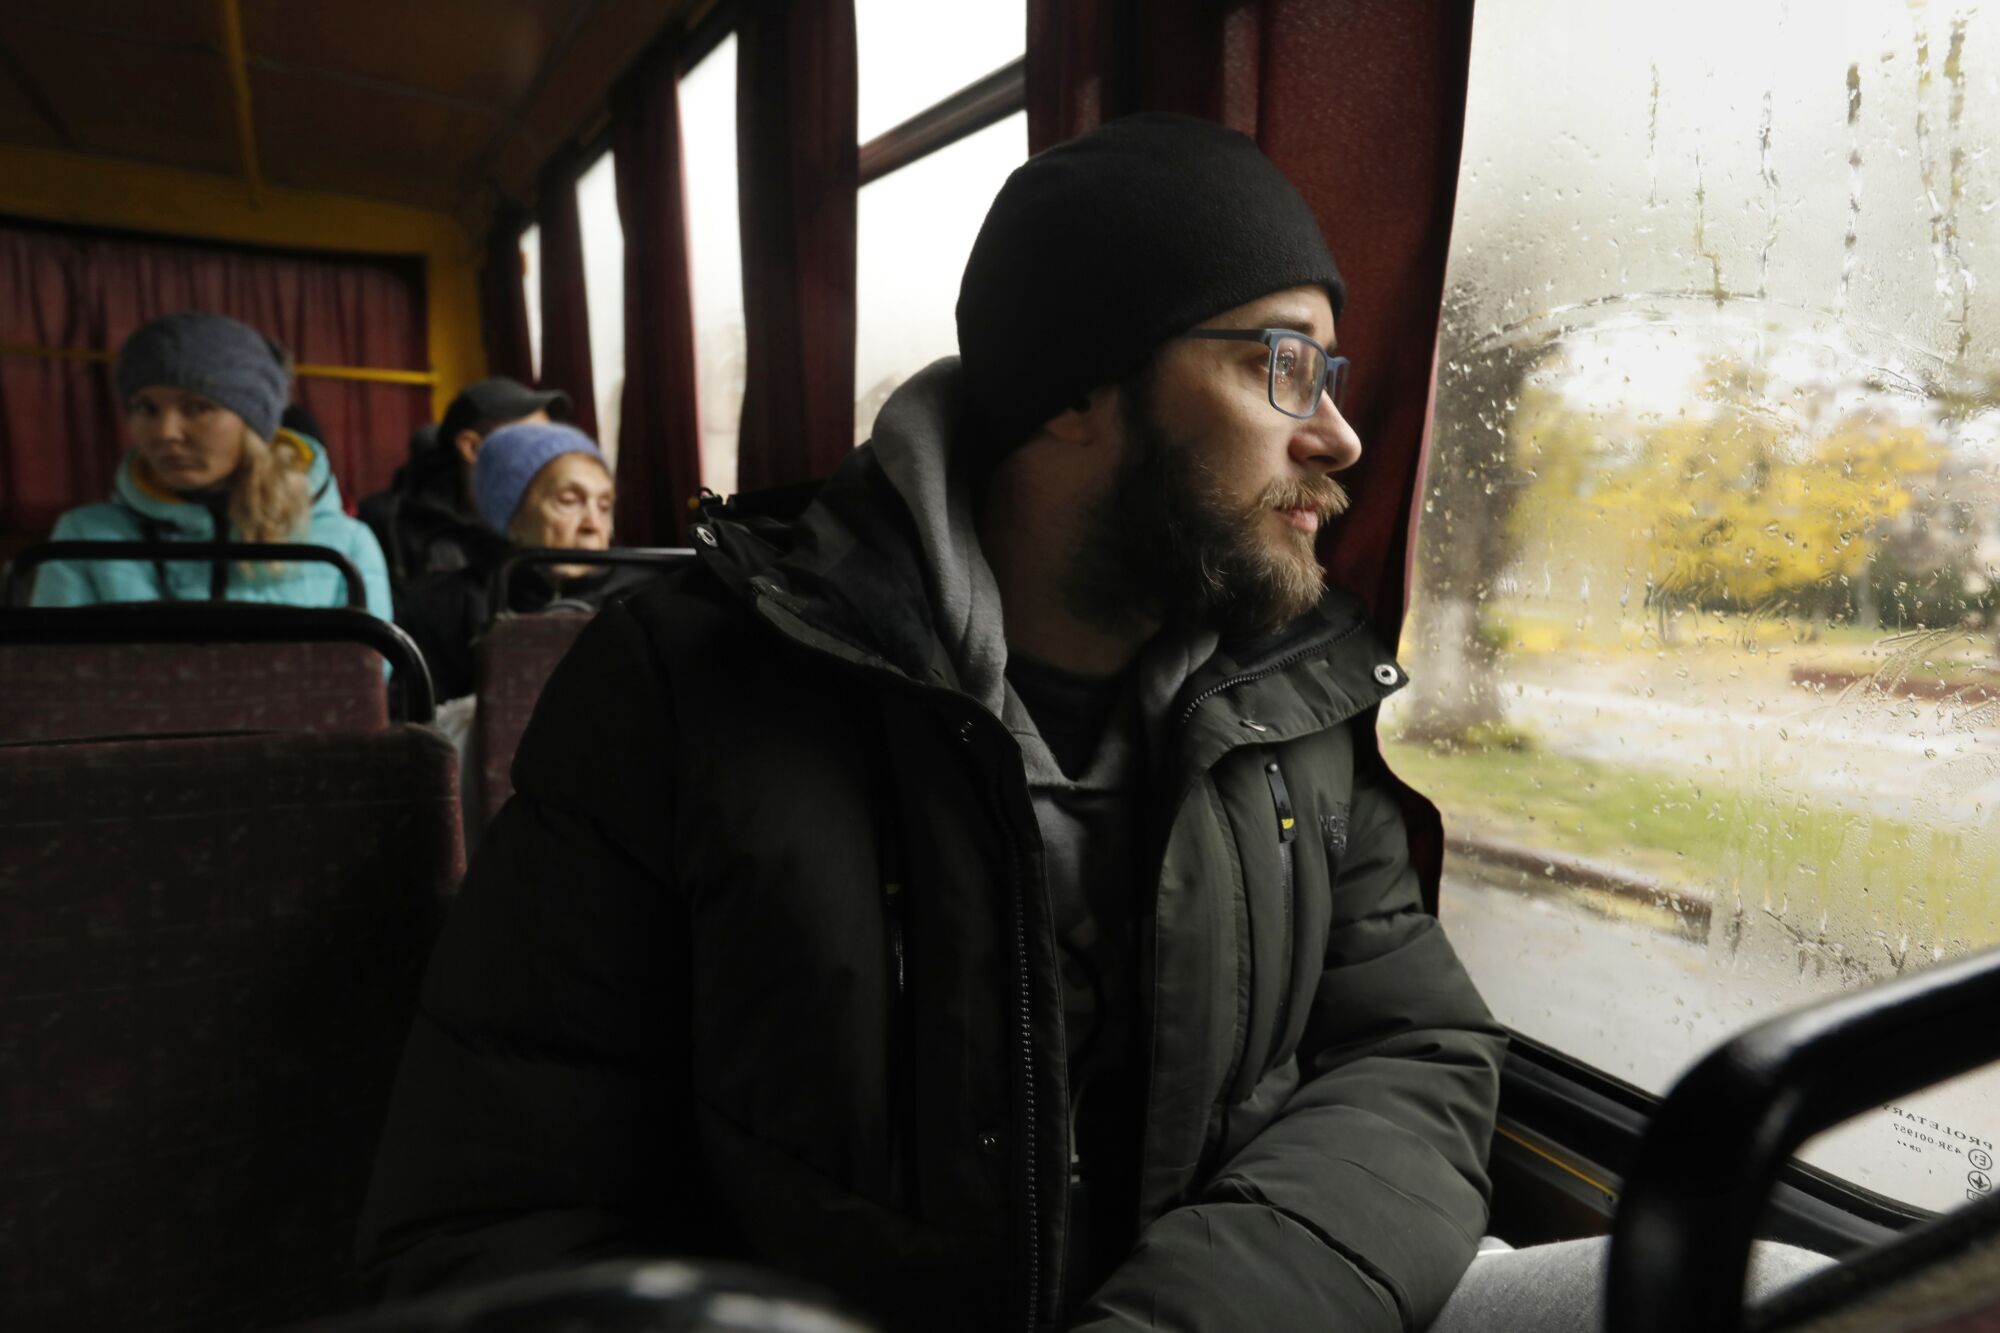 A man with a dark beard, wearing glasses and a dark cap and winter jacket, looks out the window of a bus